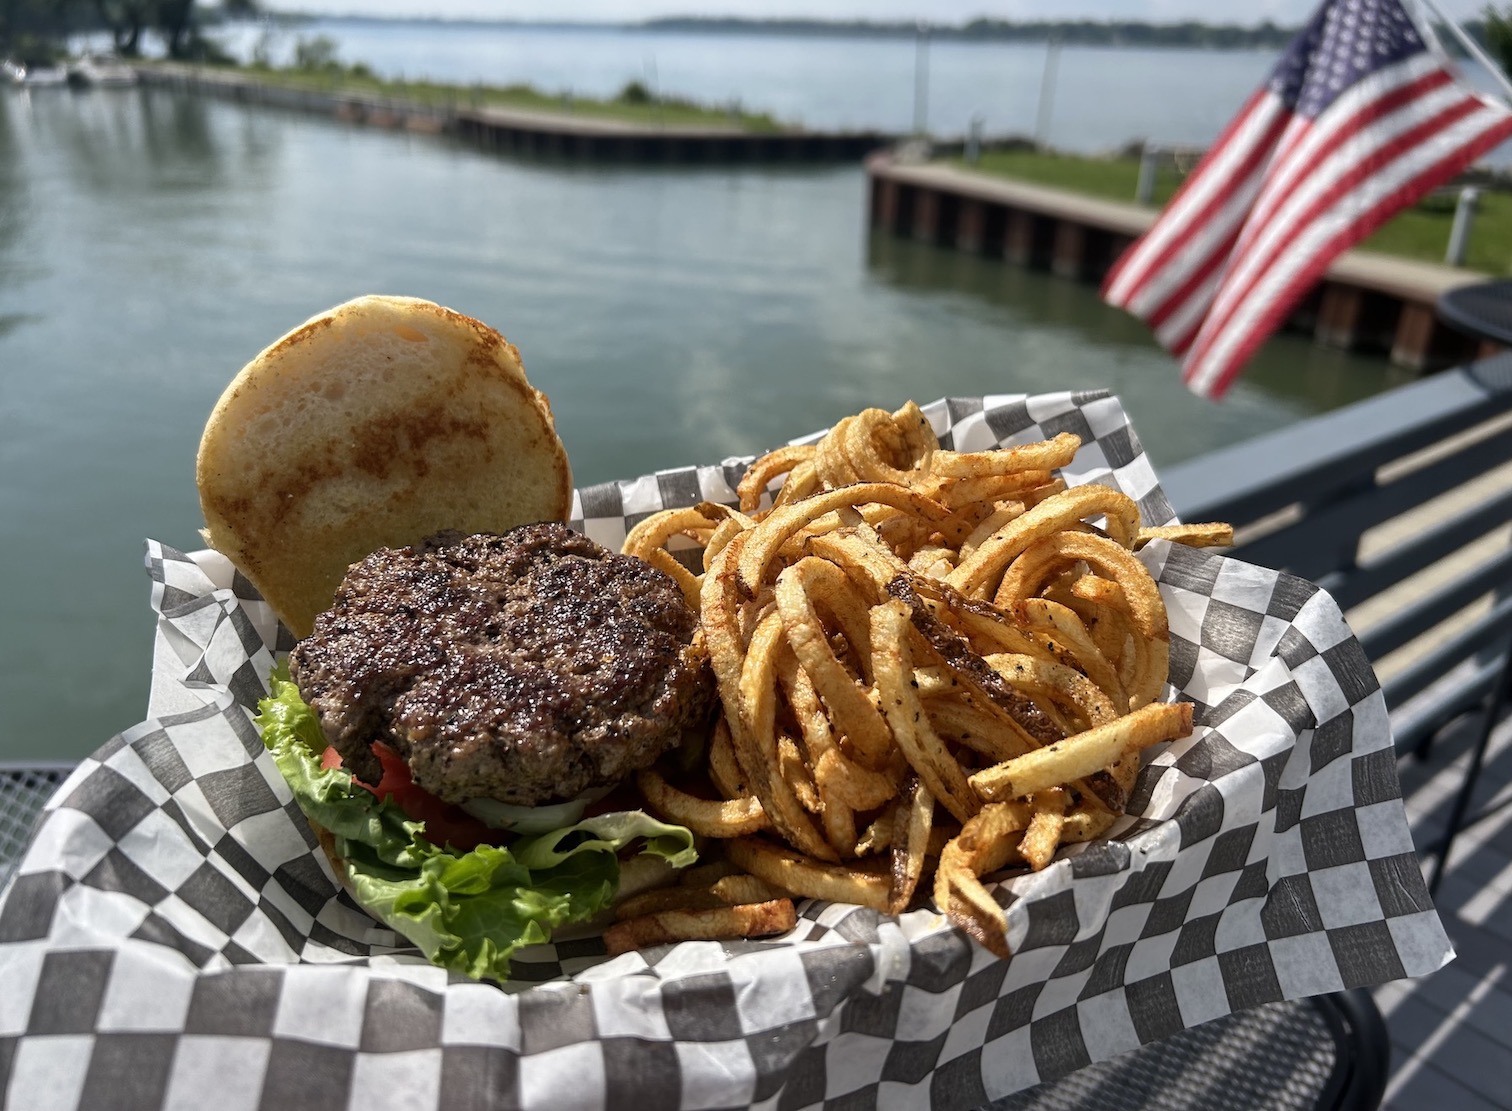 Lumberjack's Waterfront Patio Grill's burger and fries are award-winning favorites. Diners have a can't-beat view while eating at the NT restaurant. (Submitted)